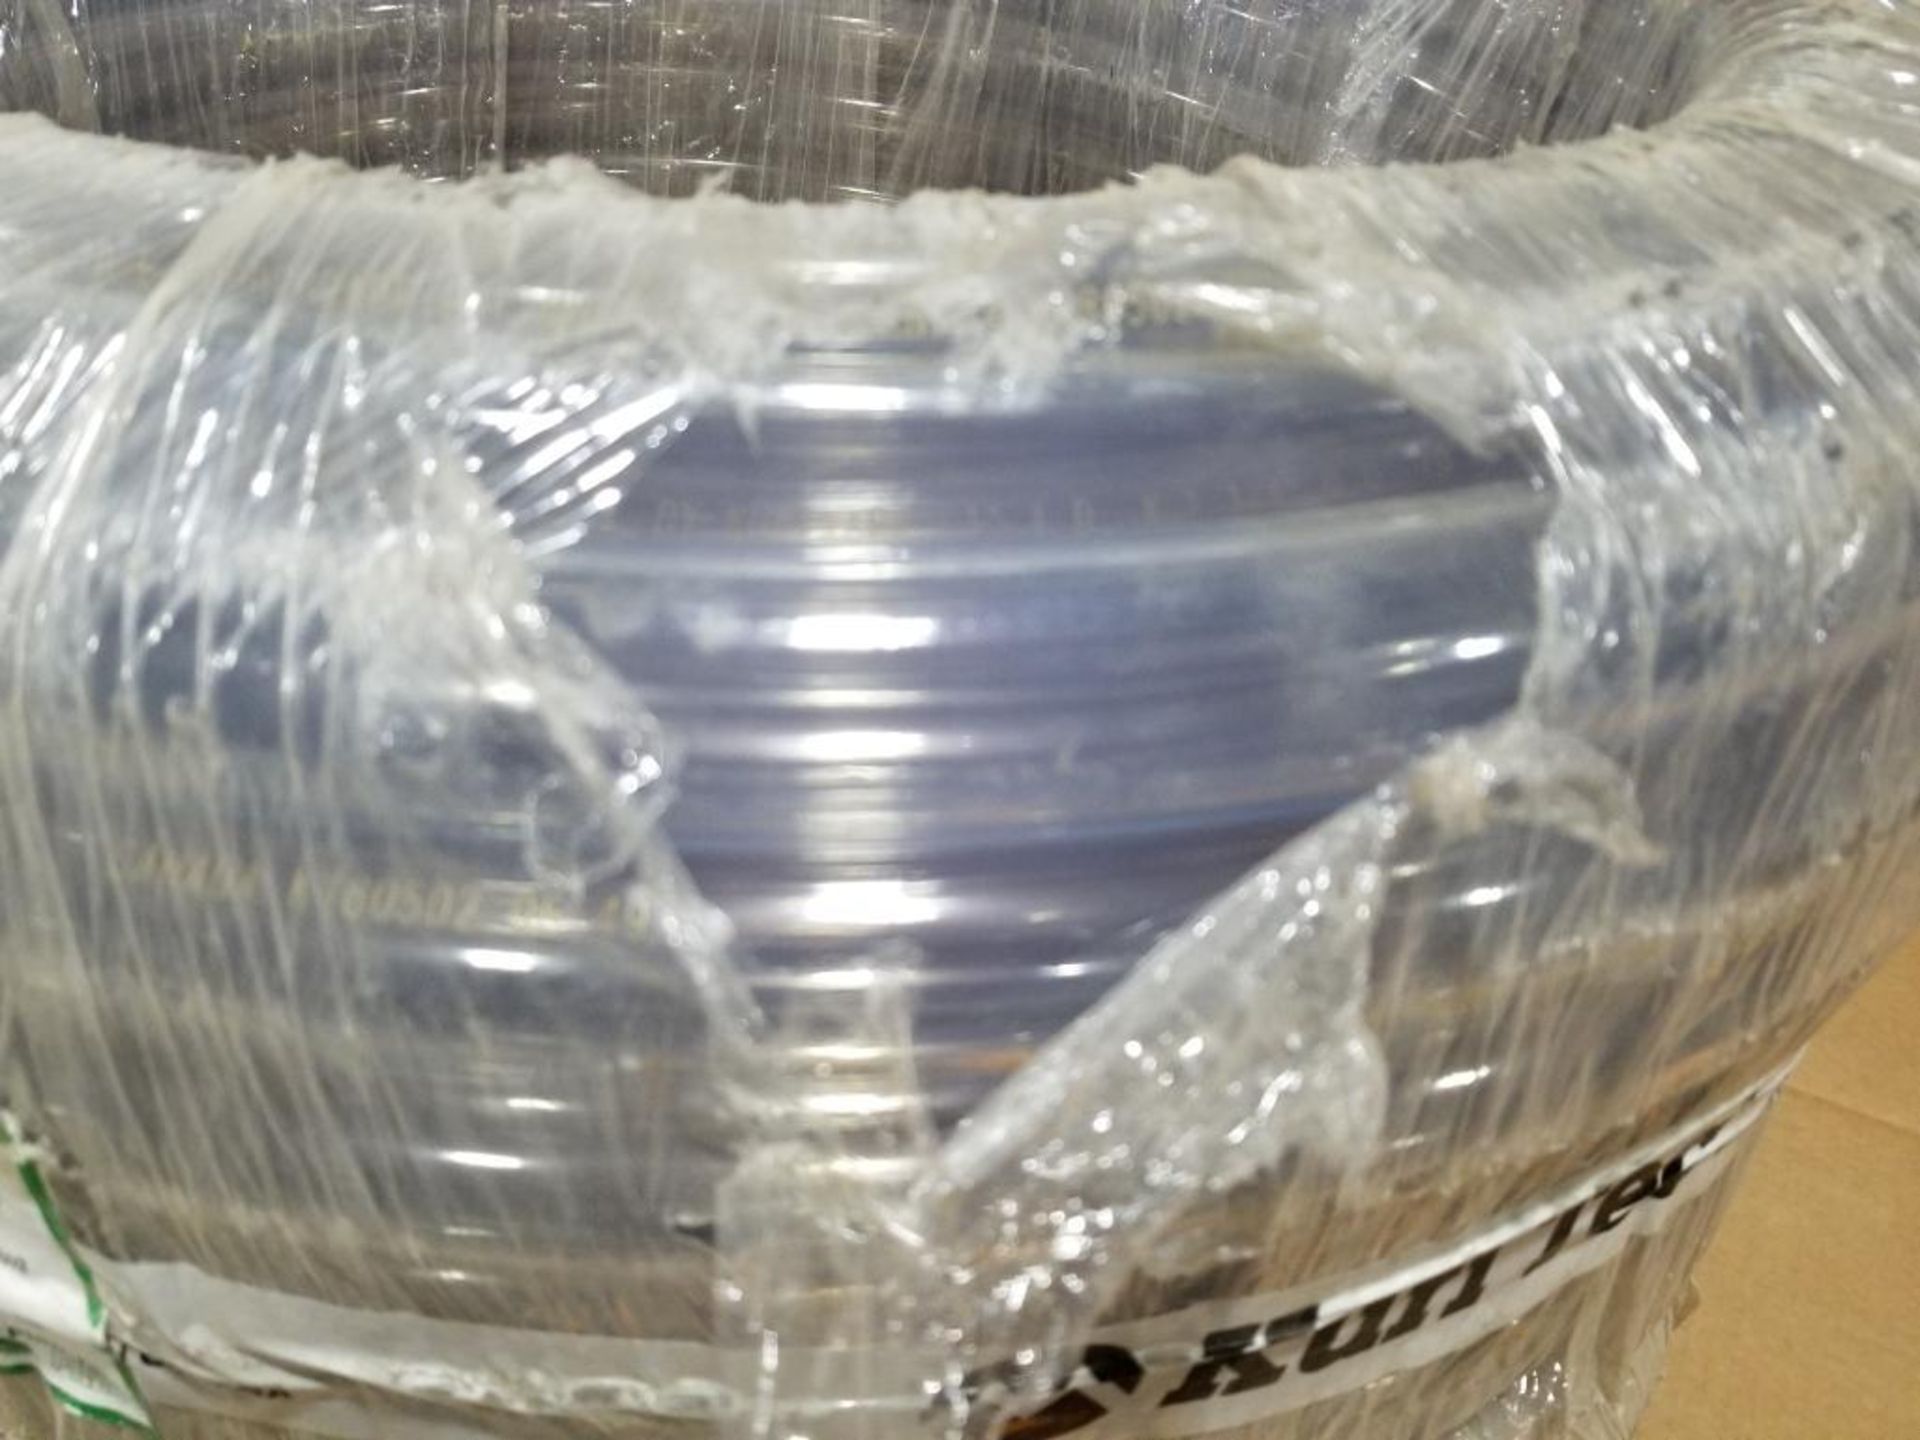 Qty 200 ft - Kuri-Tec clear PVC tubing. 1in x 1 1/4in. 2 boxes of 100ft. Part number K010-1620X100. - Image 6 of 6